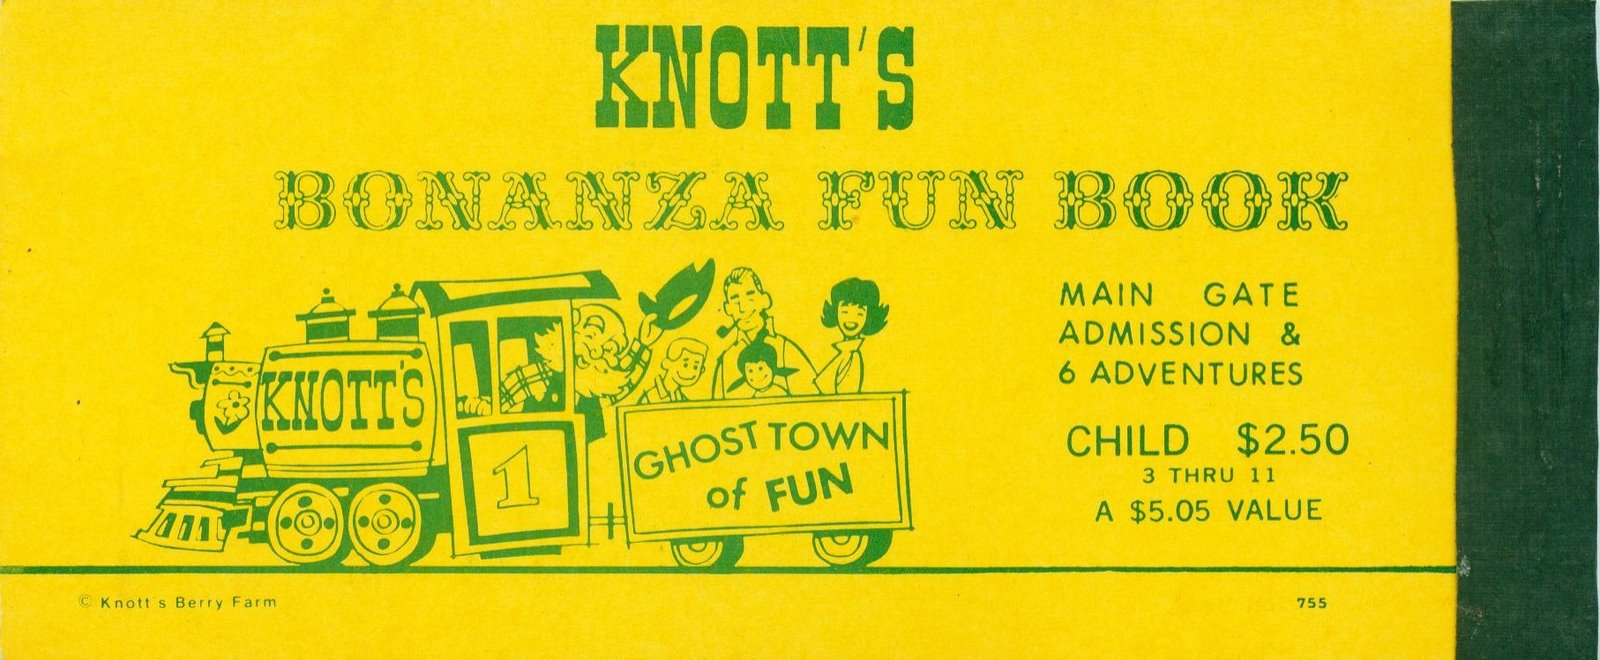 [knotts+ticket+book+back+child+may+1975.jpg]